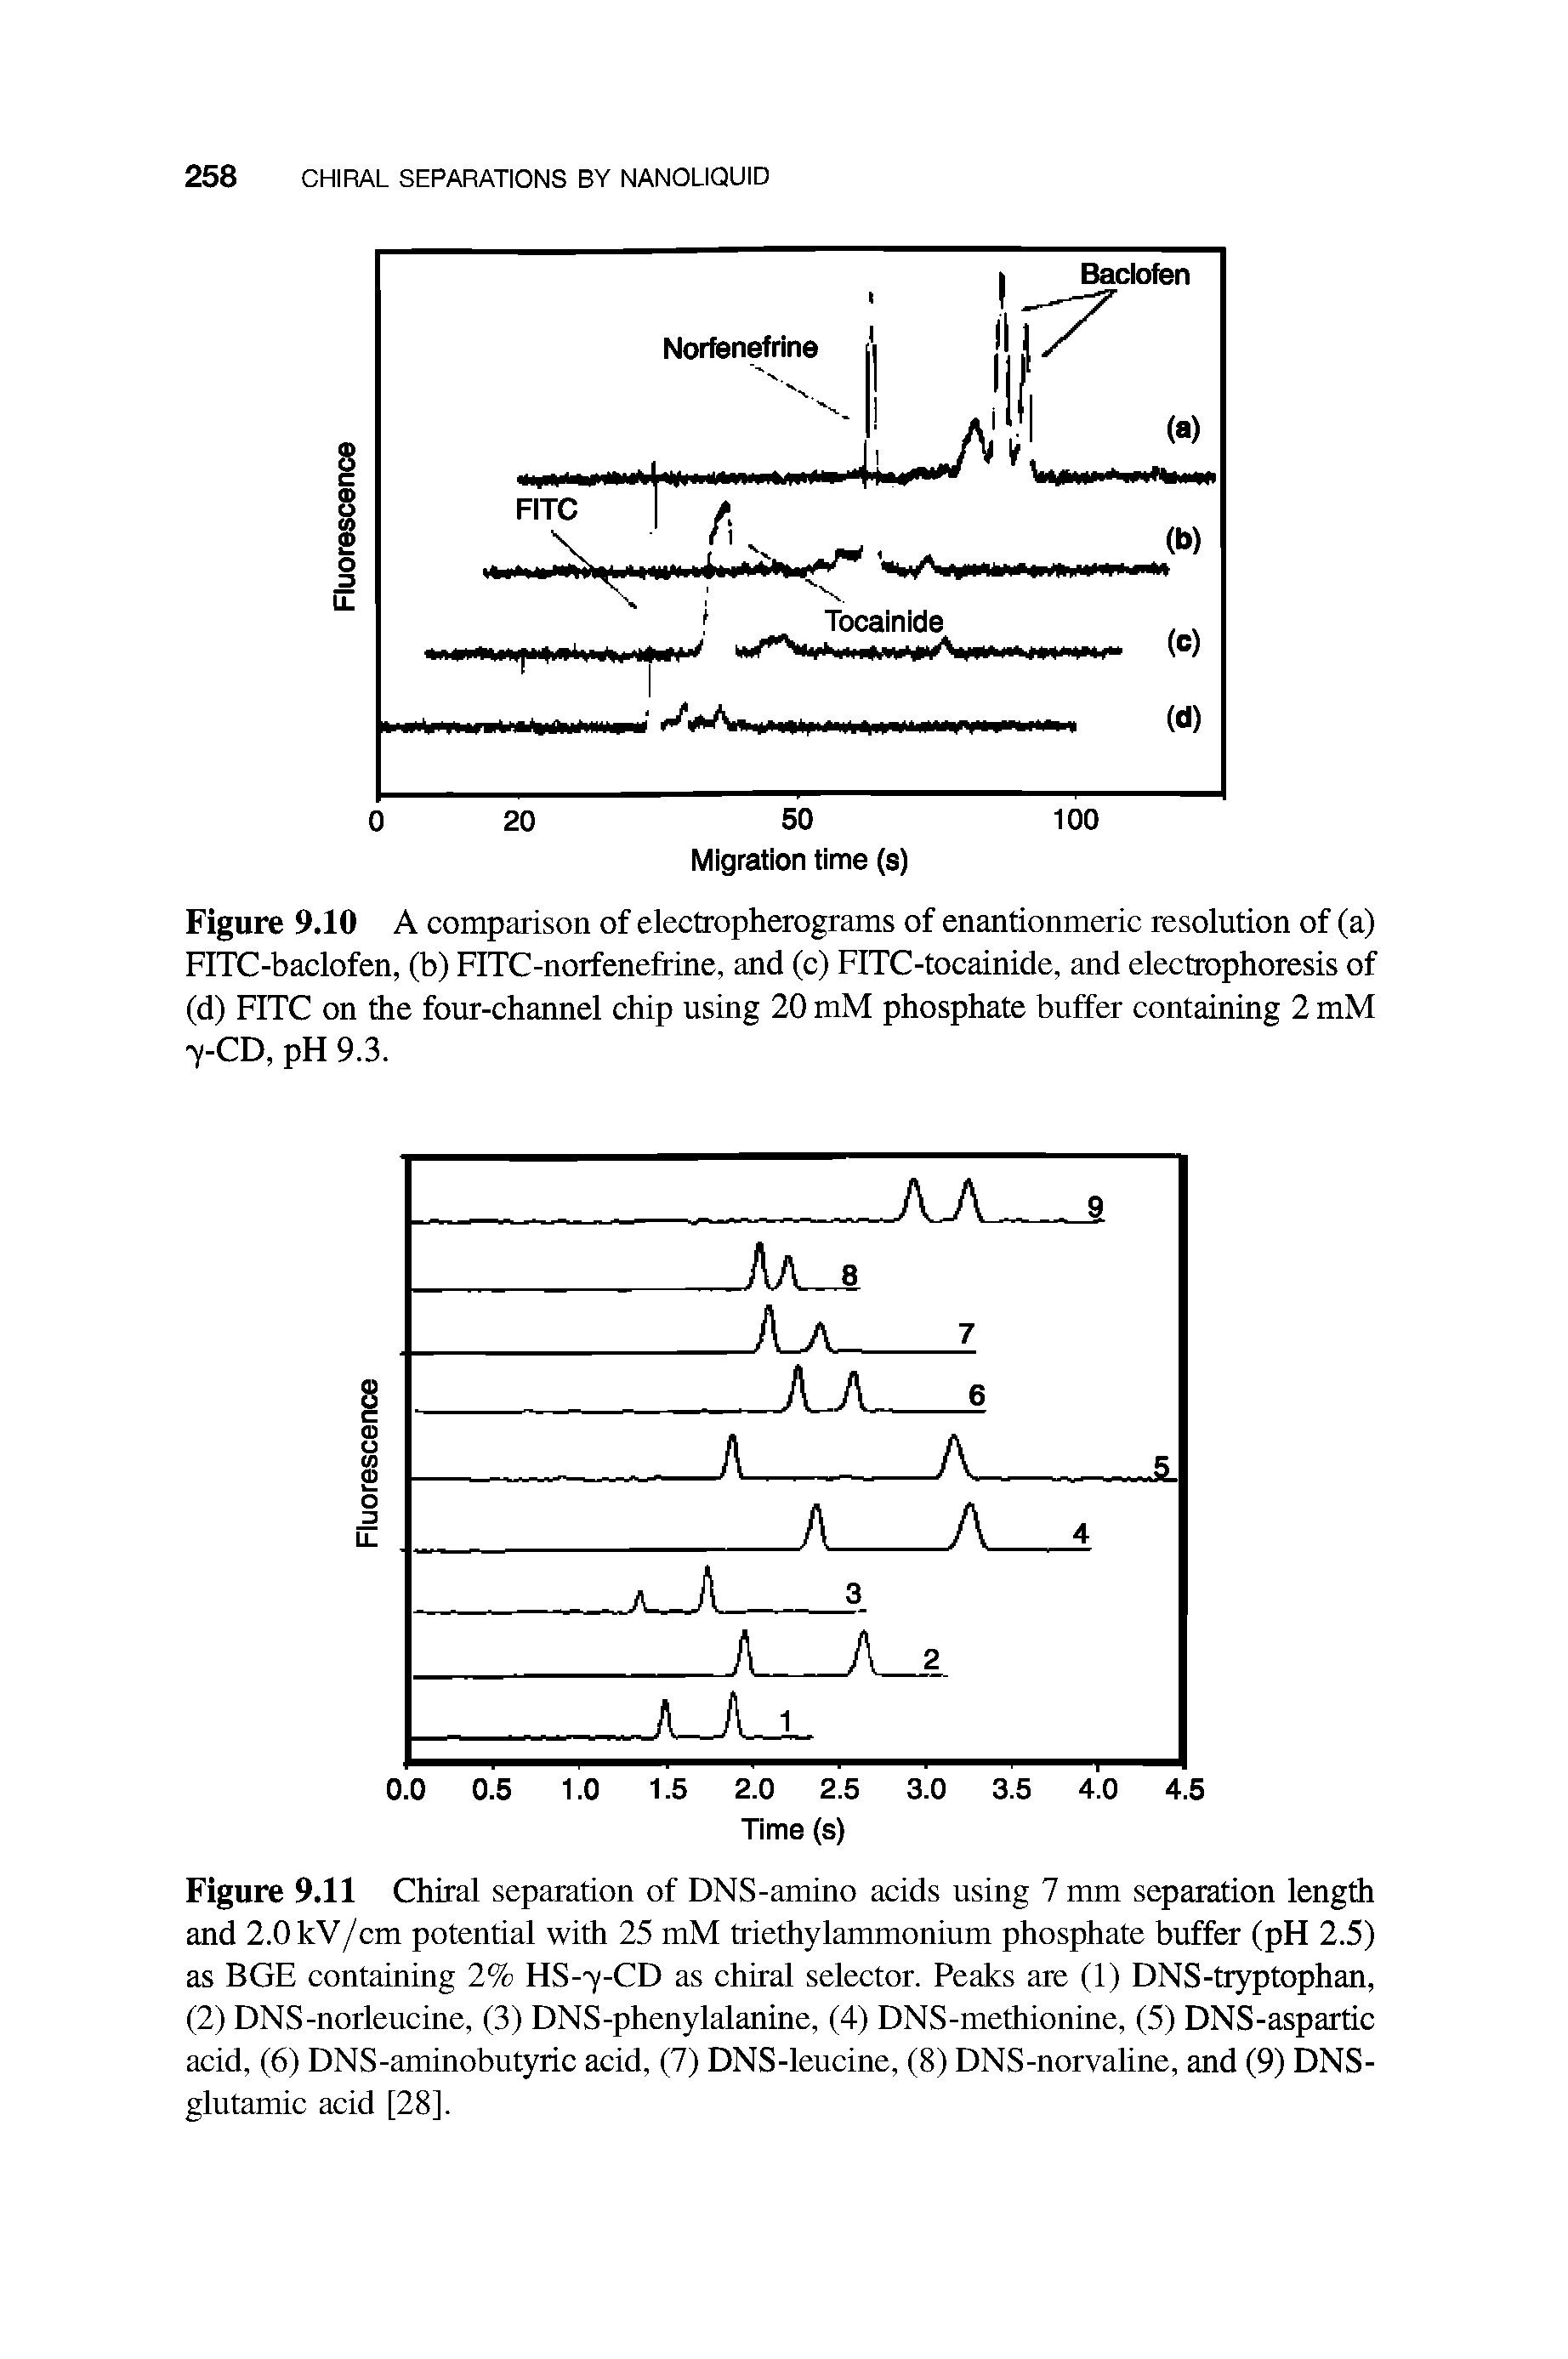 Figure 9.11 Chiral separation of DNS-amino acids using 7 mm separation length and 2.0 kV/cm potential with 25 mM triethylammonium phosphate buffer (pH 2.5) as BGE containing 2% HS-y-CD as chiral selector. Peaks are (1) DNS-tryptophan, (2) DNS-norleucine, (3) DNS-phenylalanine, (4) DNS-methionine, (5) DNS-aspartic acid, (6) DNS-aminobutyric acid, (7) DNS-leucine, (8) DNS-norvaline, and (9) DNS-glutamic acid [28].